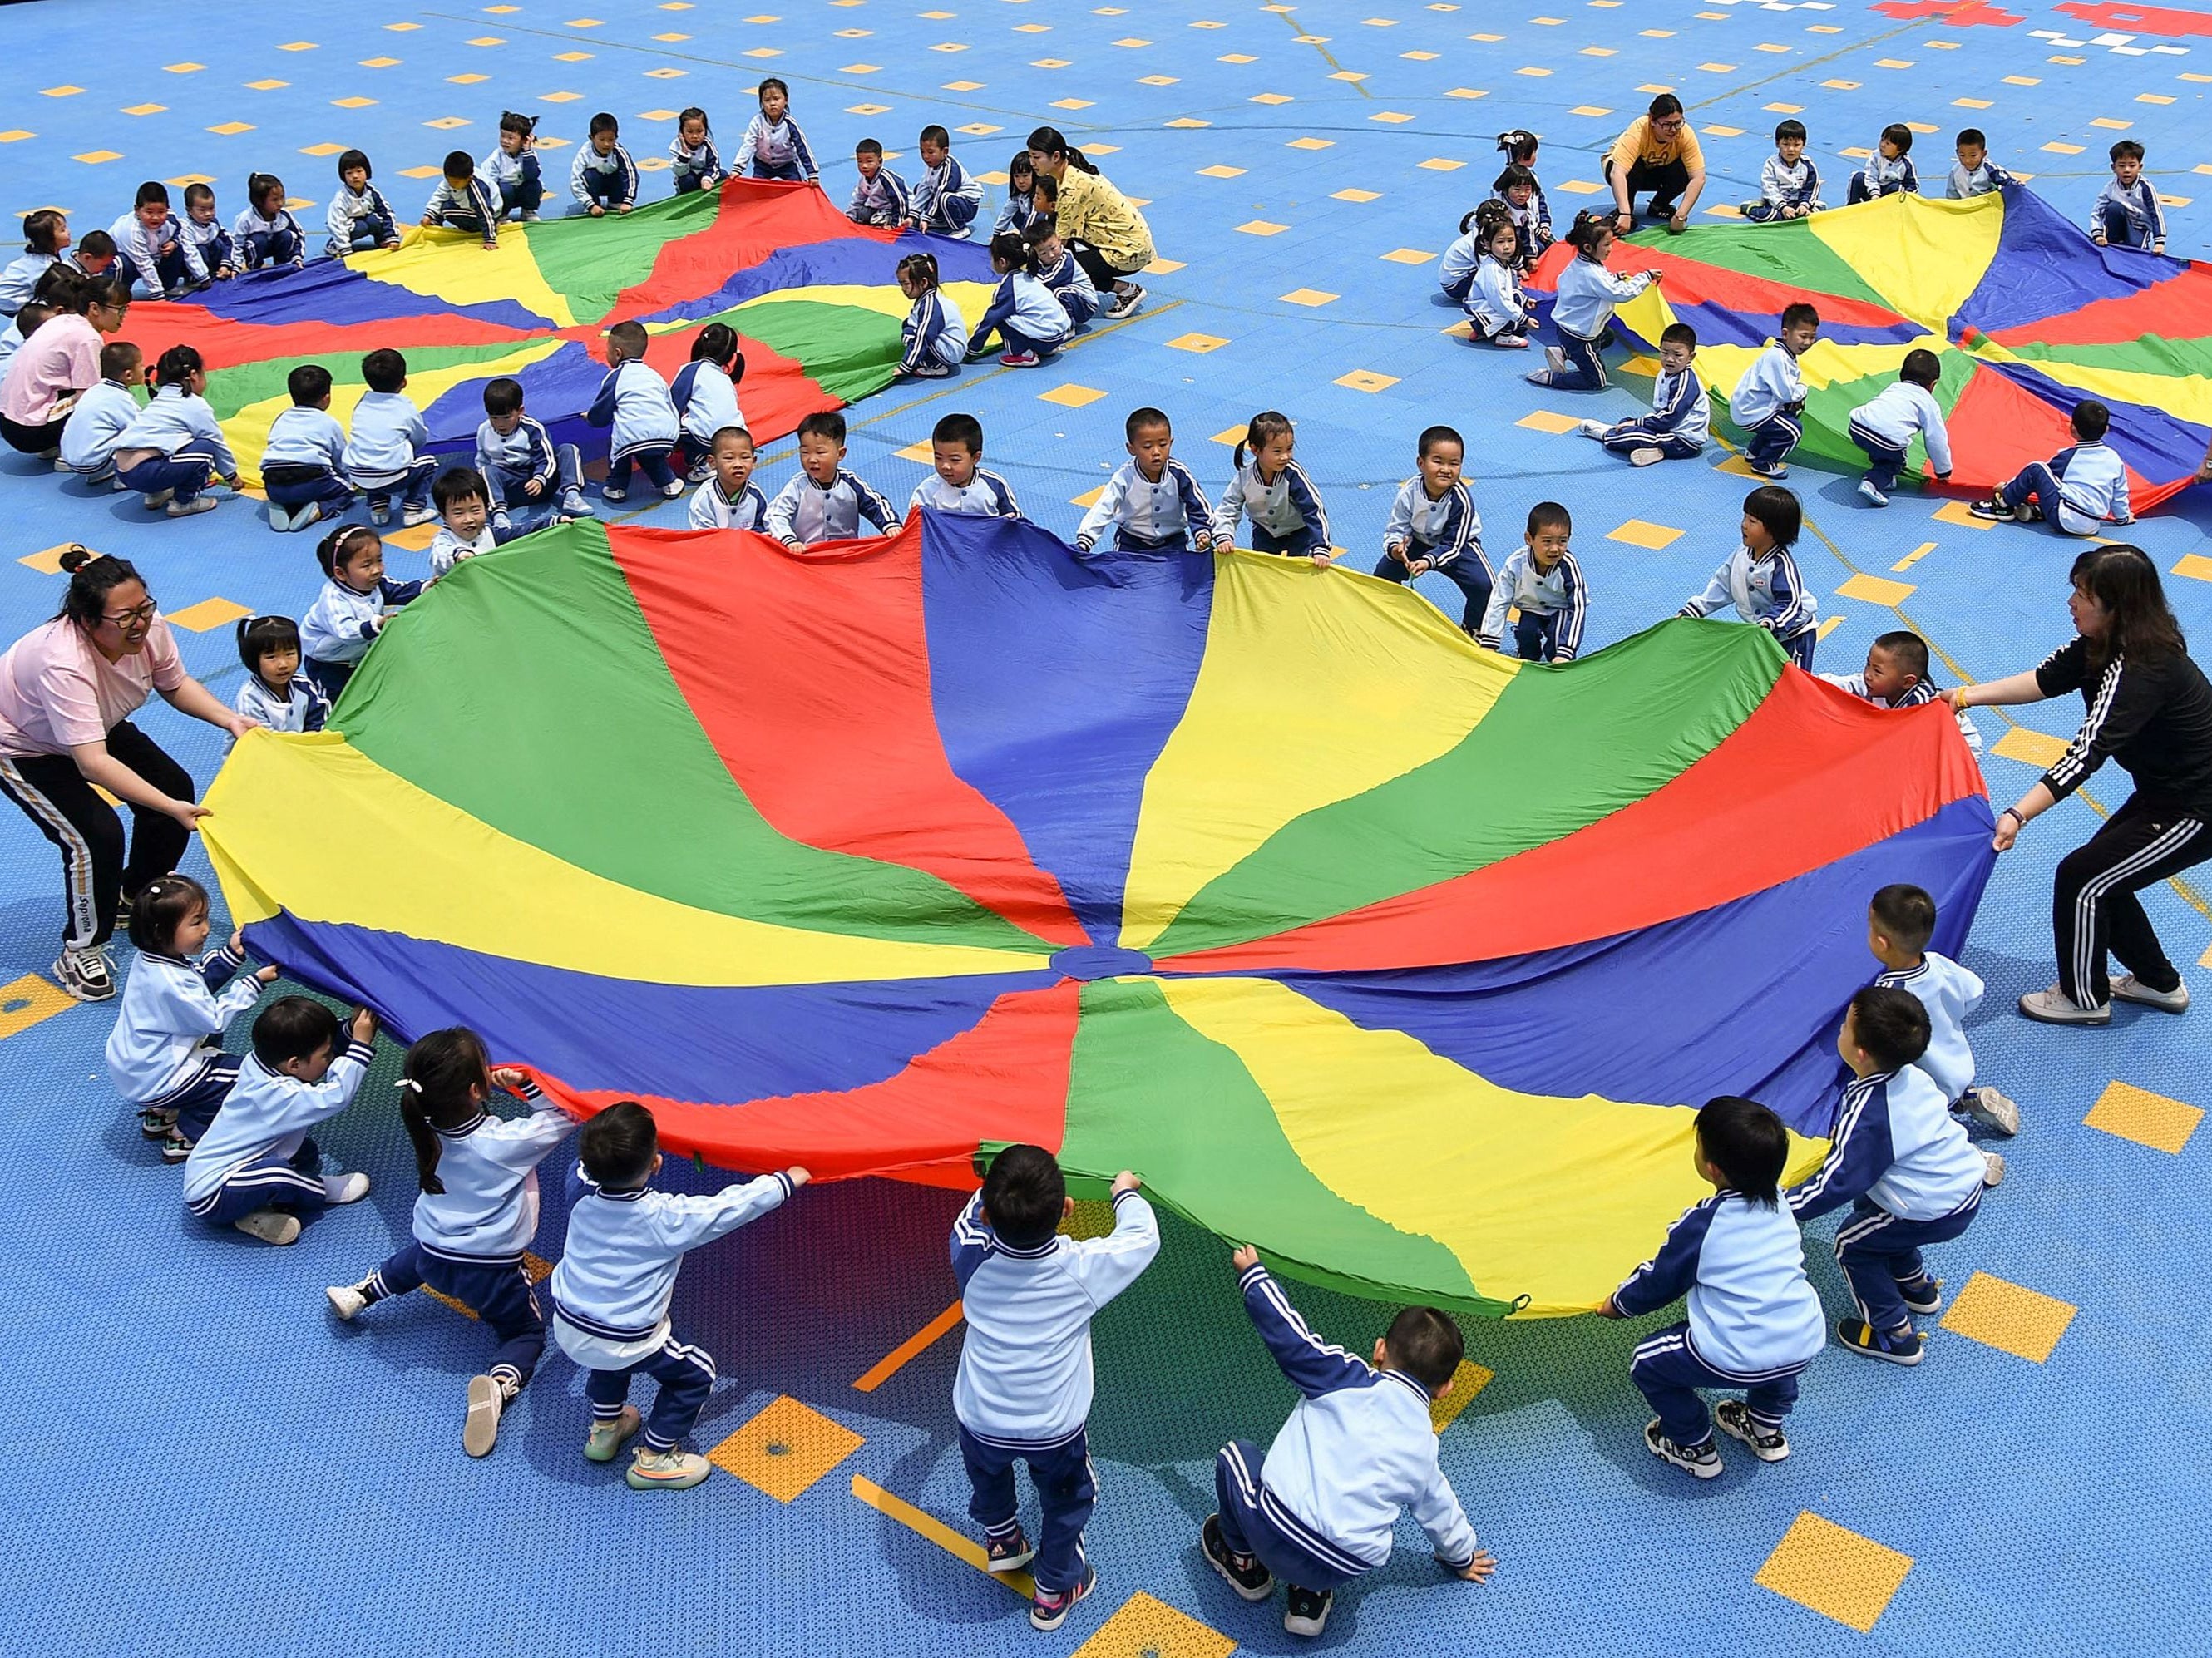 Children play at a kindergarten in Yantai, Shandong, on 31 May 2021